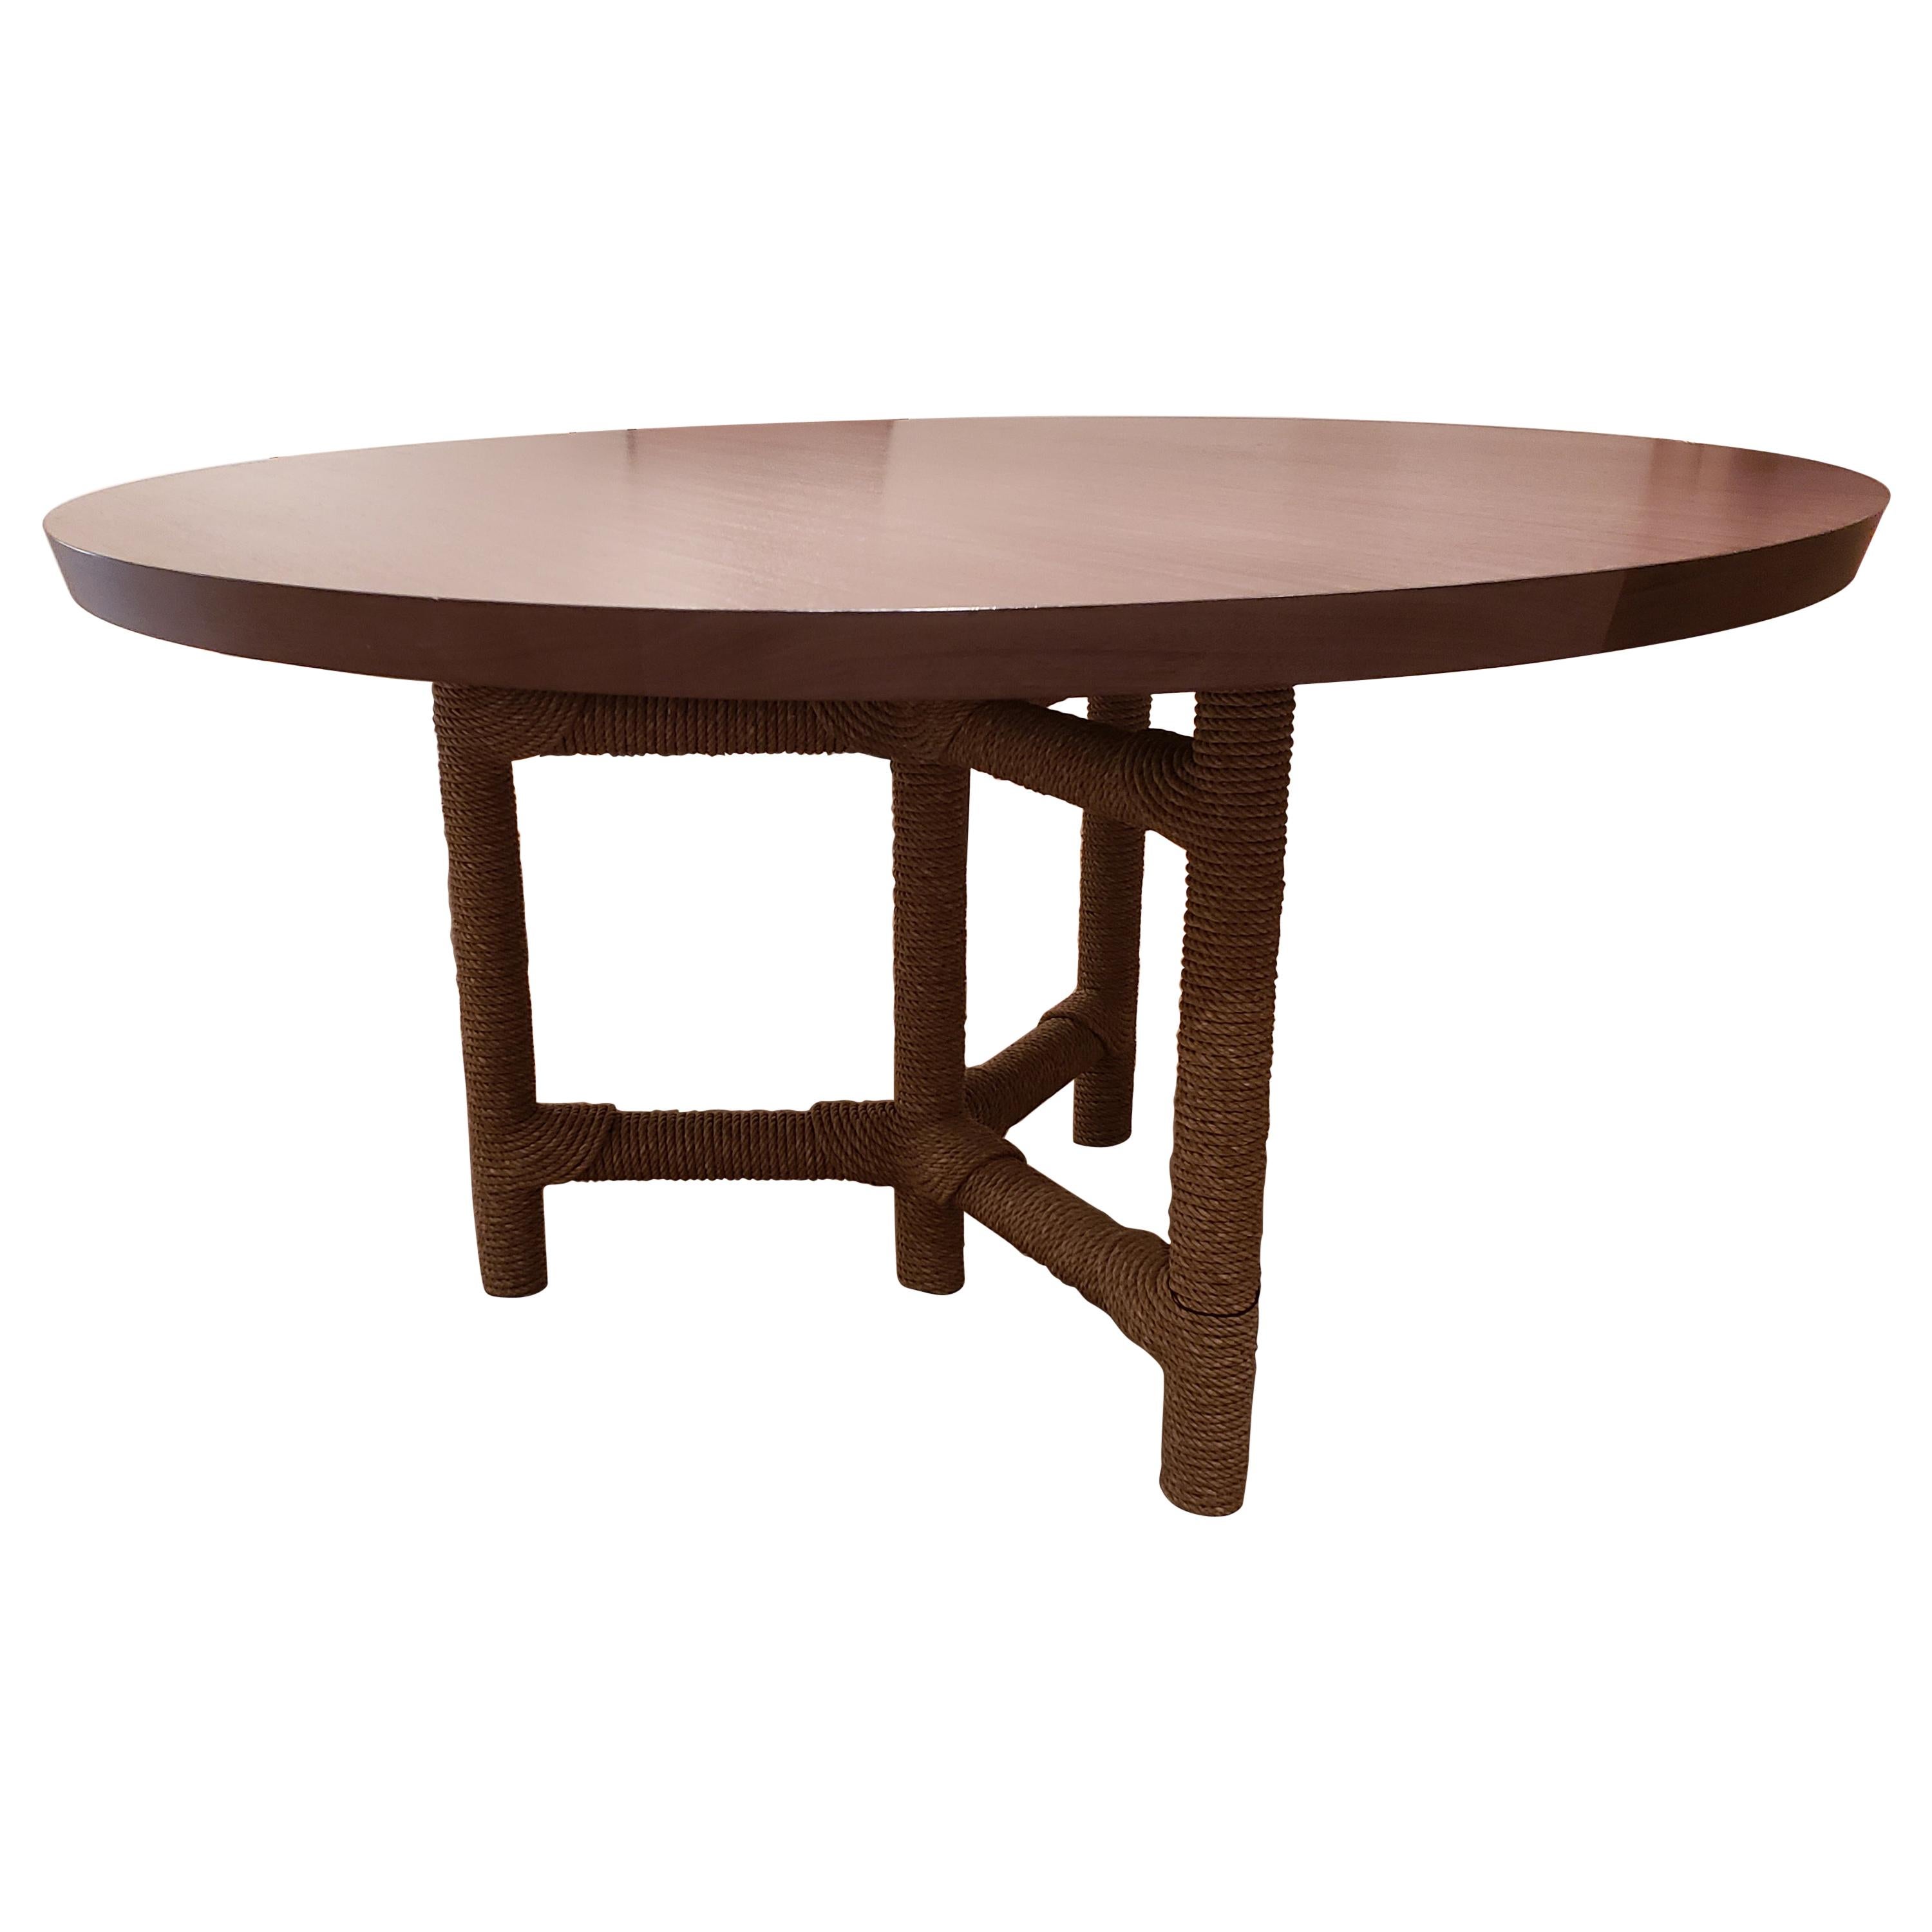 HOLLY HUNT HH2015615 Afriba Table in Paldao 185 by Christian Astuguevieille